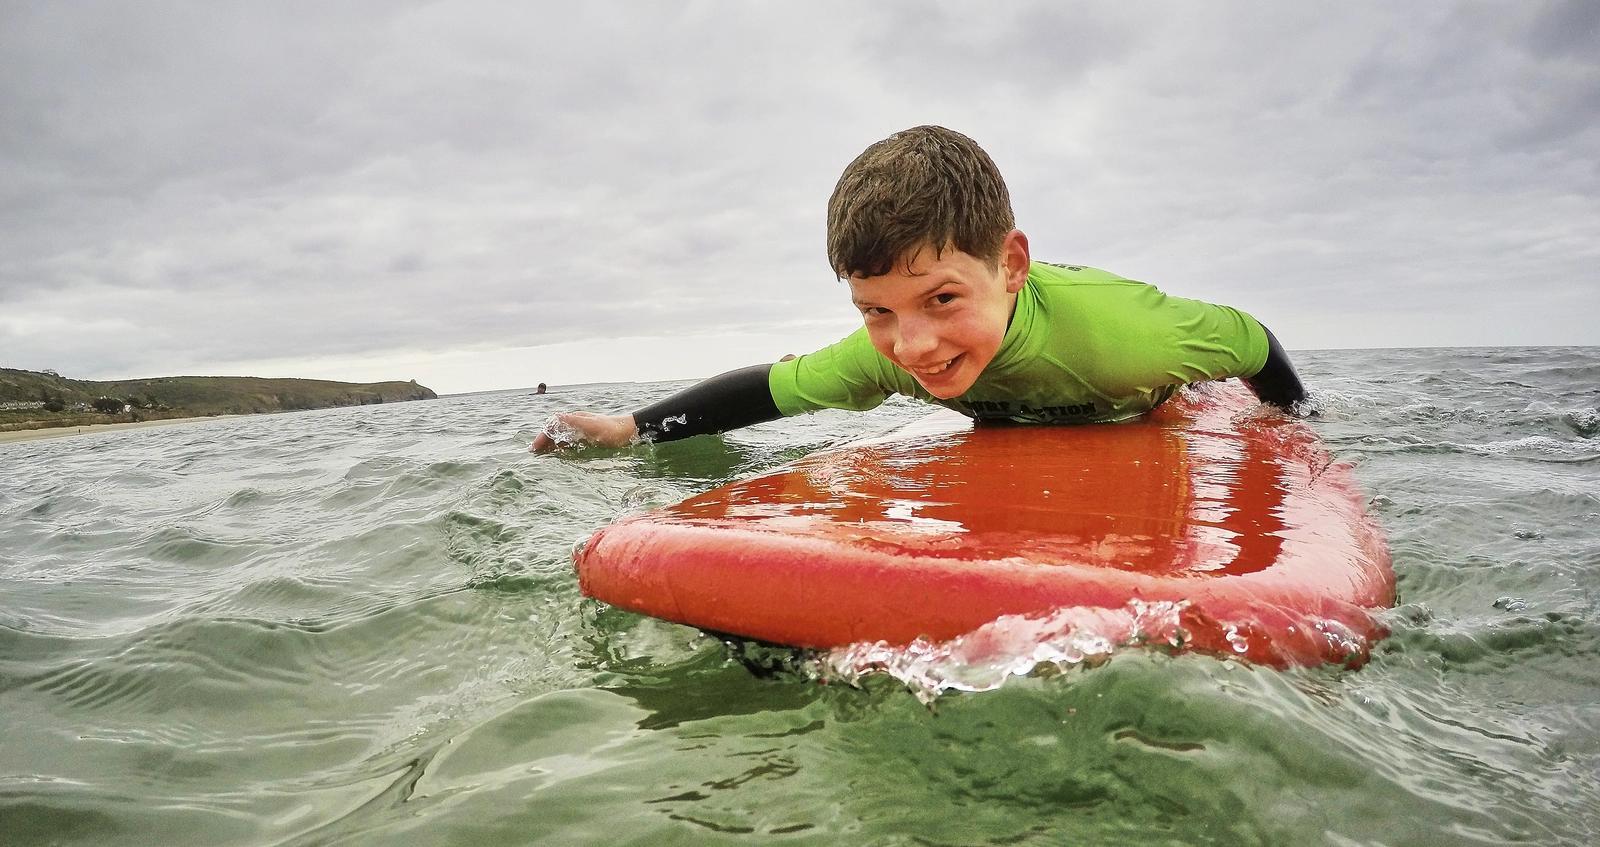 A child on a surfboard